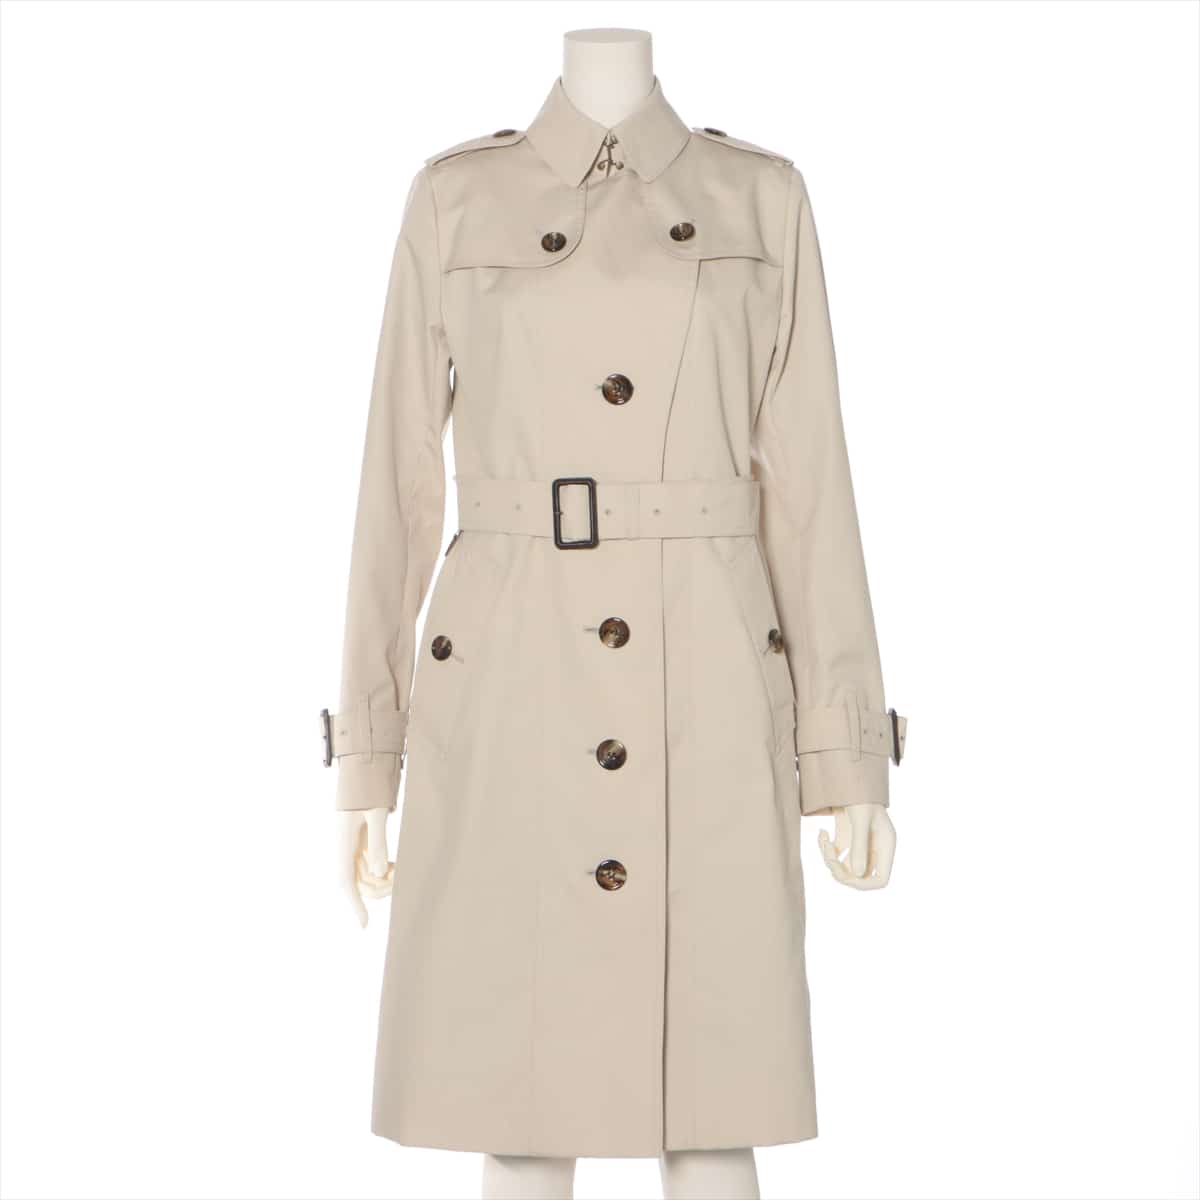 Burberry London Cotton & Polyester Trench coat 38 Ladies' Beige